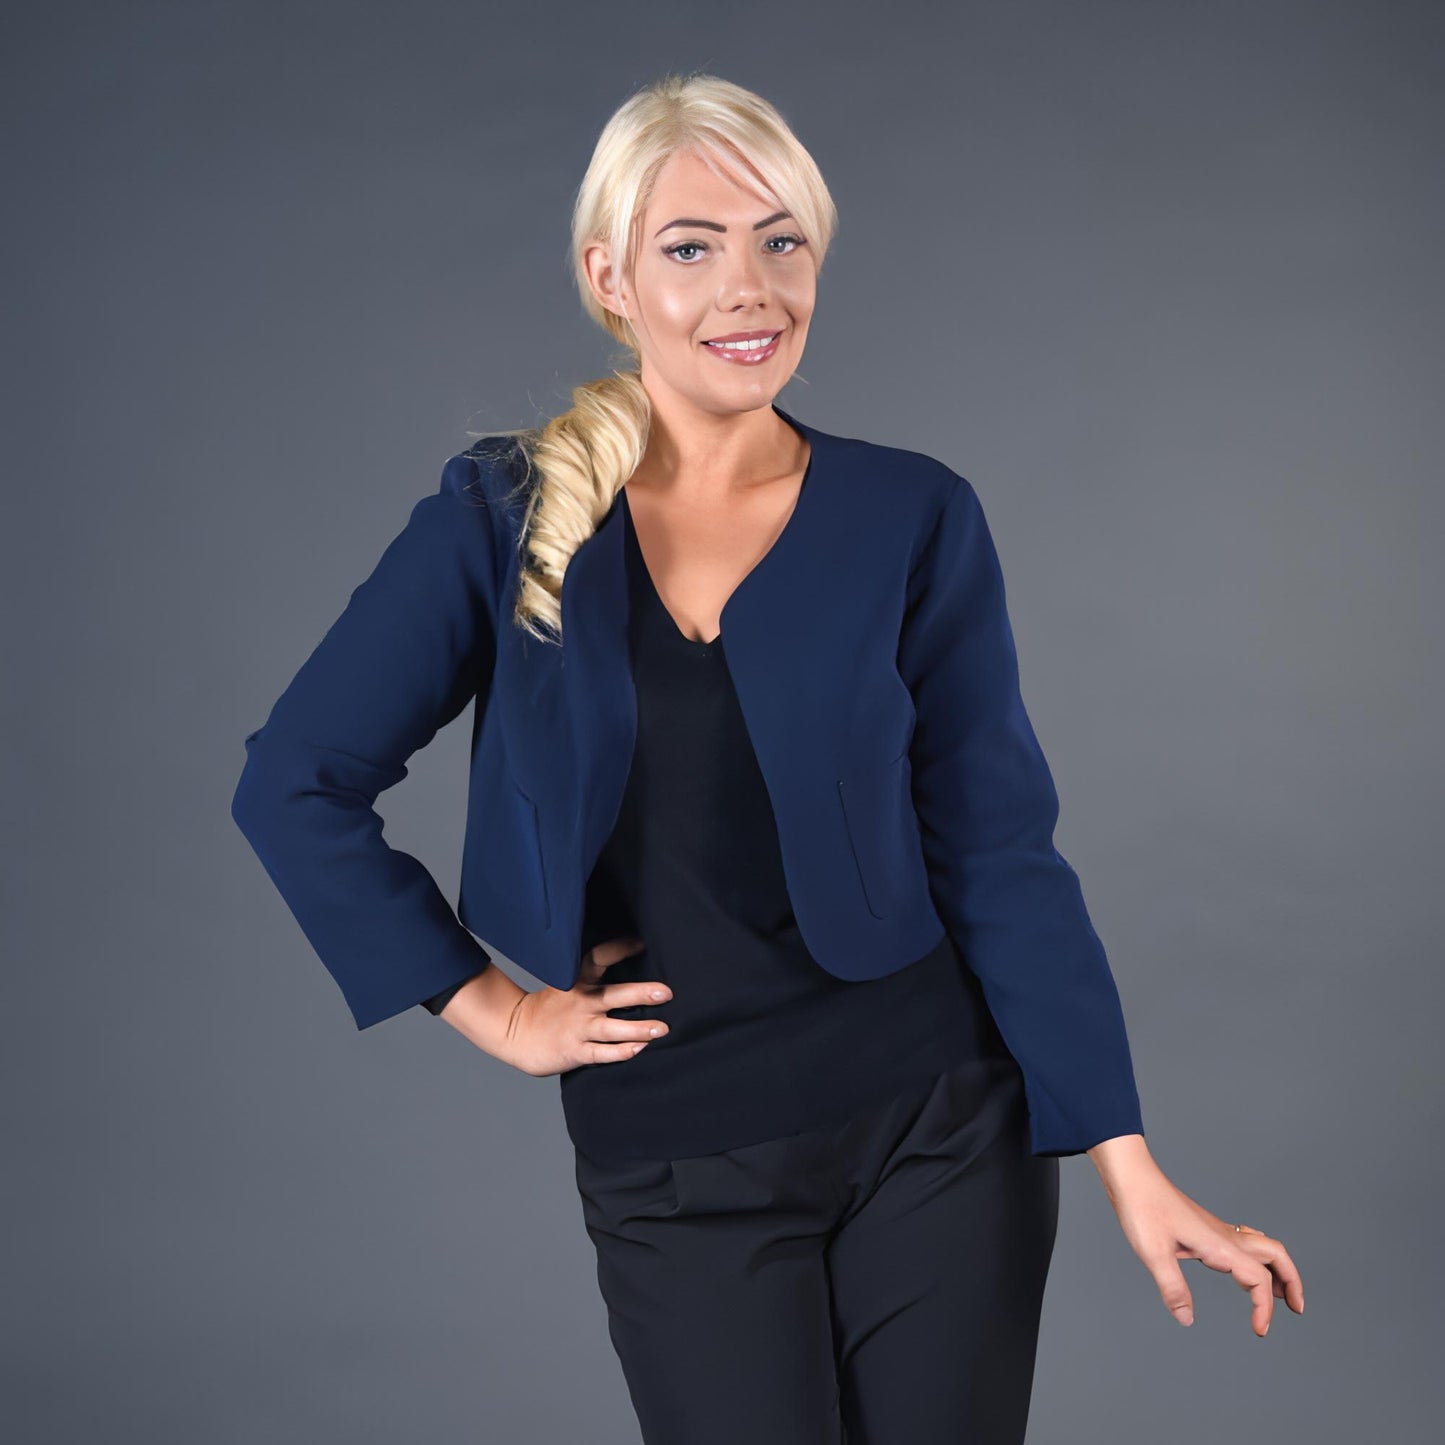 Sewing Pattern - The Eloise Jacket by The Pattern Preacher